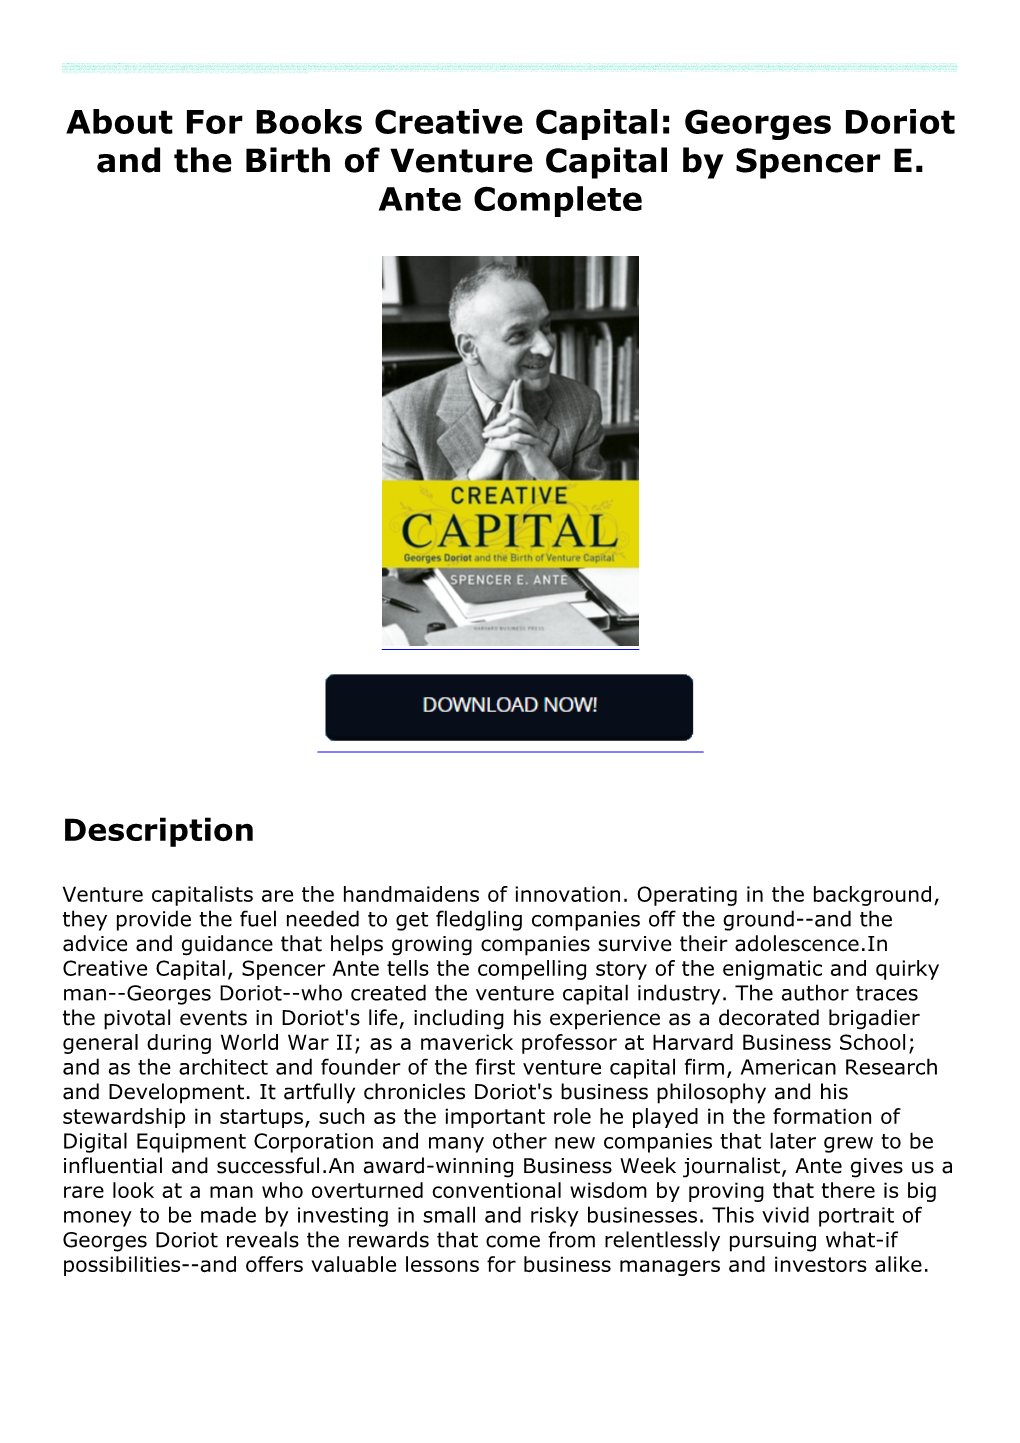 About for Books Creative Capital: Georges Doriot and the Birth of Venture Capital by Spencer E